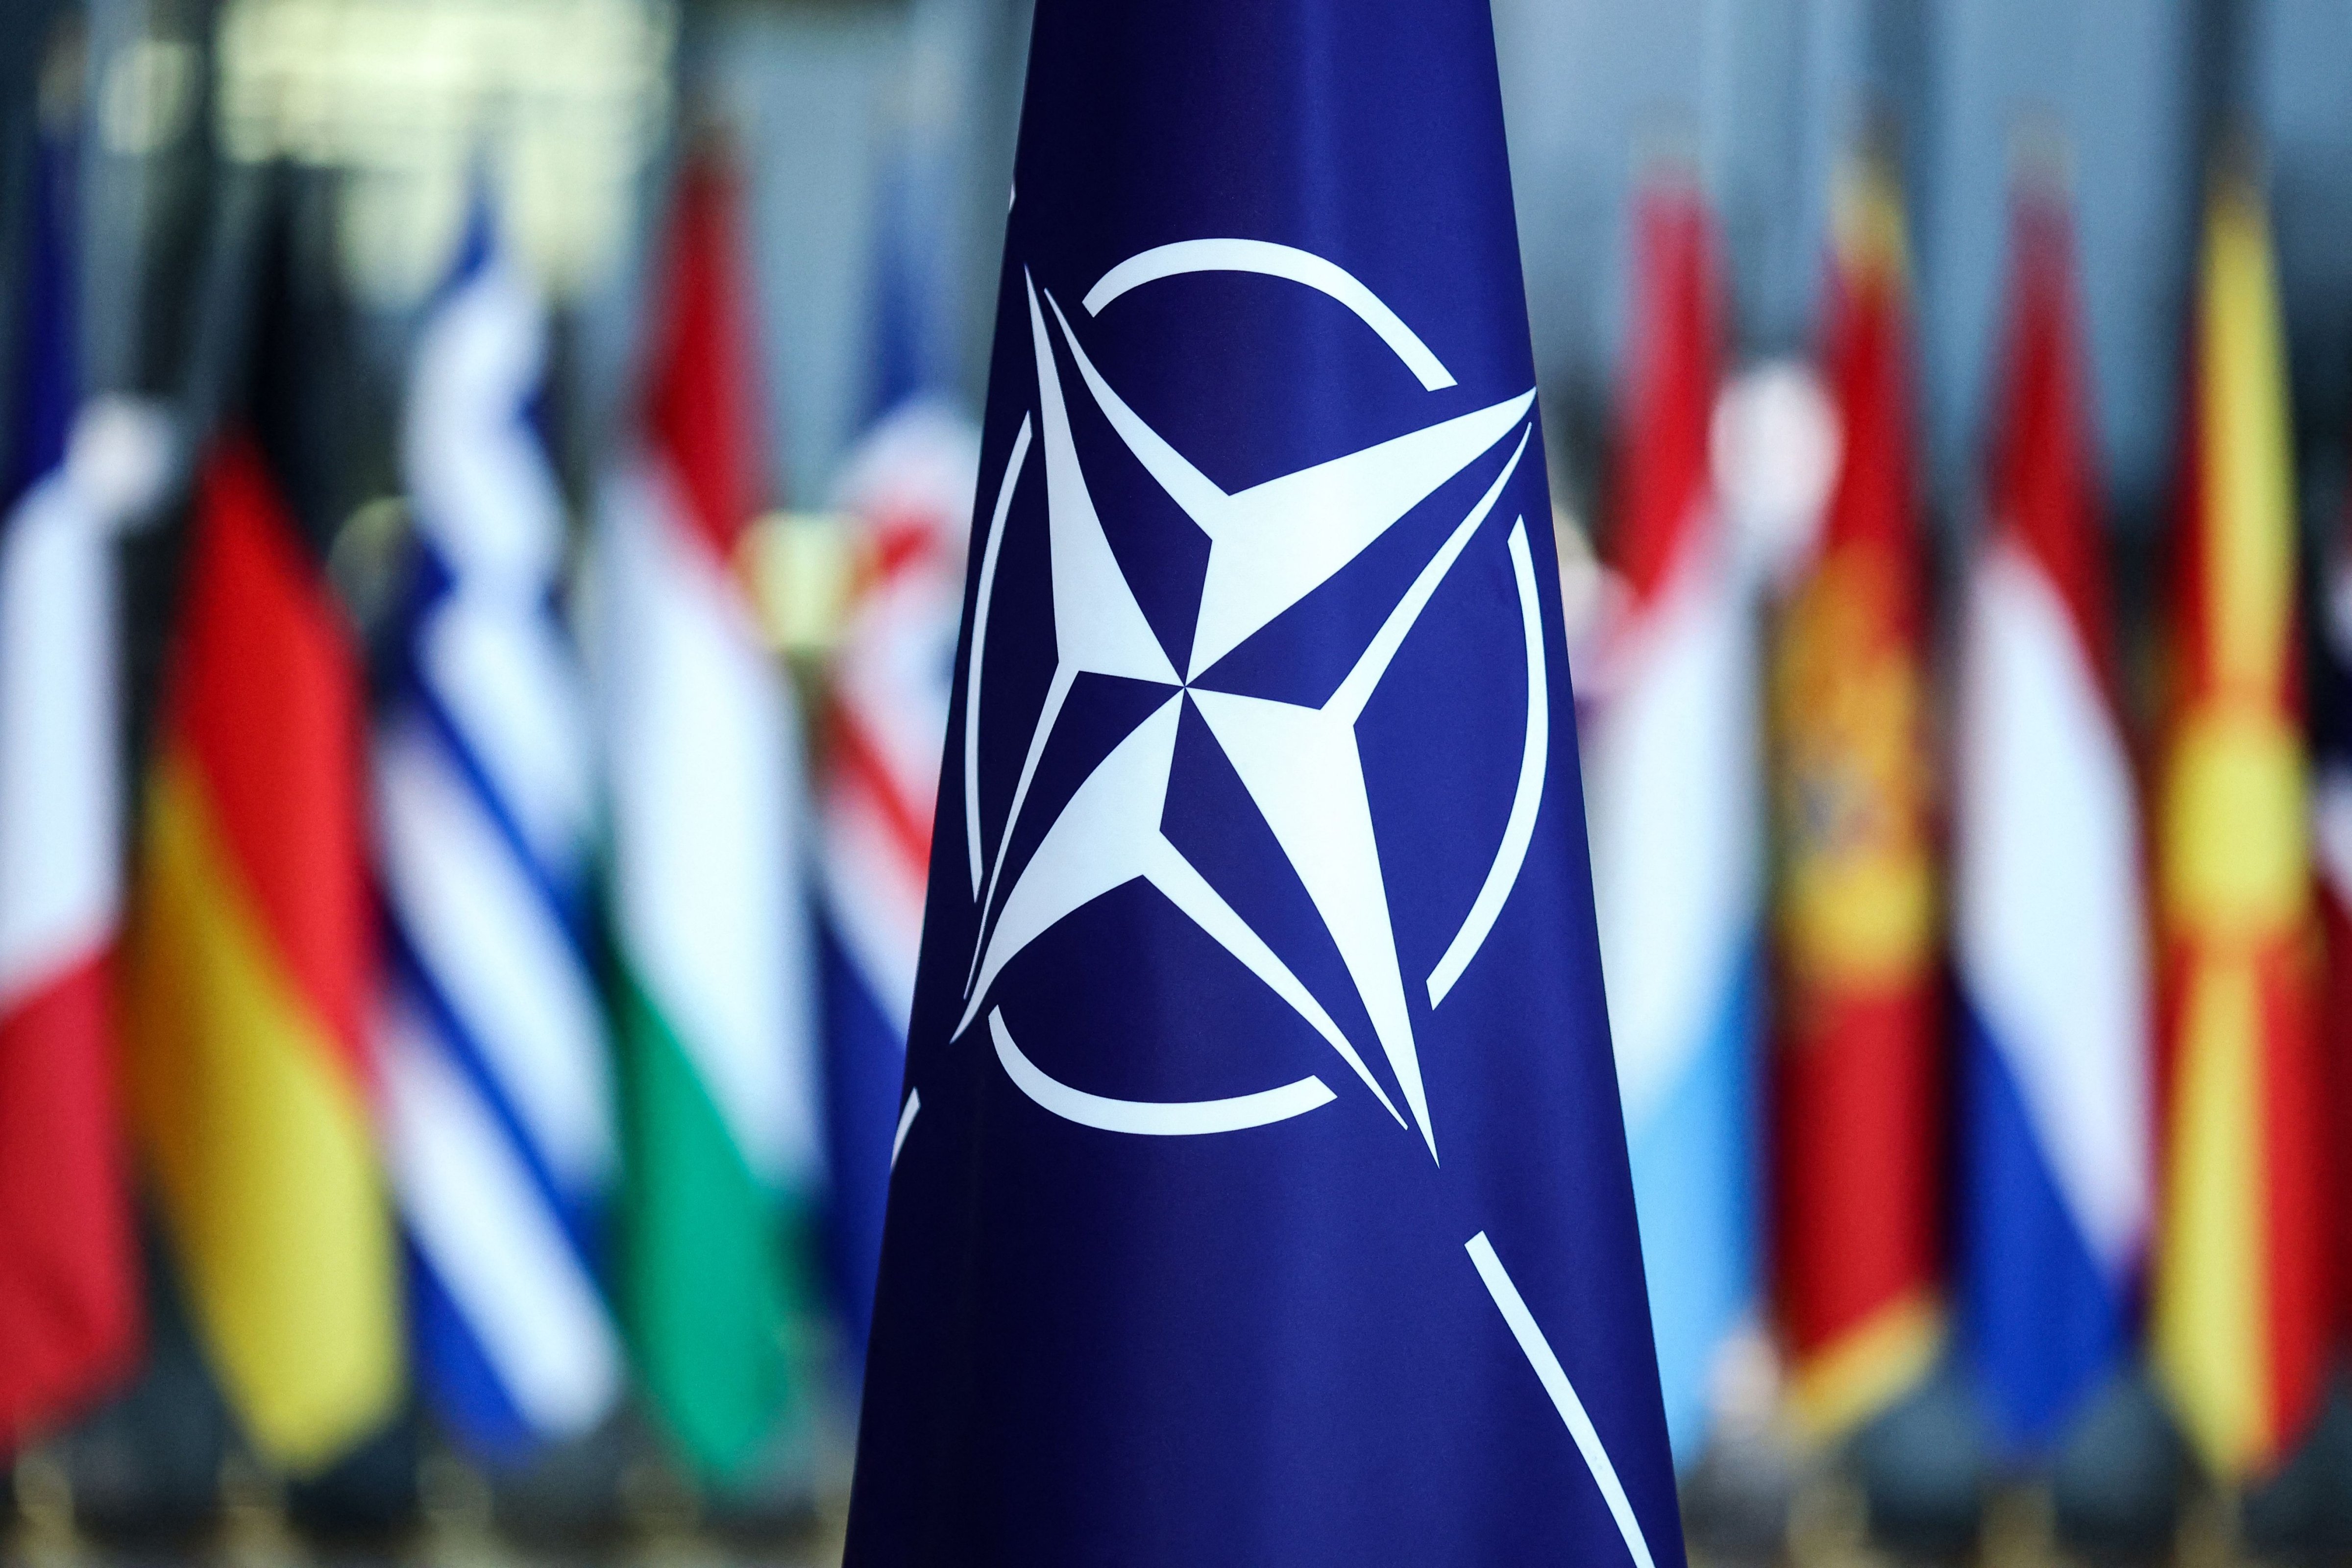 A photograph taken on Feb. 16, 2022 shows the flag of the North Atlantic Treaty Organization (NATO) prior to the Meeting of NATO Ministers of Defense at NATO Headquarters in Brussels. (KENZO TRIBOUILLARD/AFP via Getty Images)